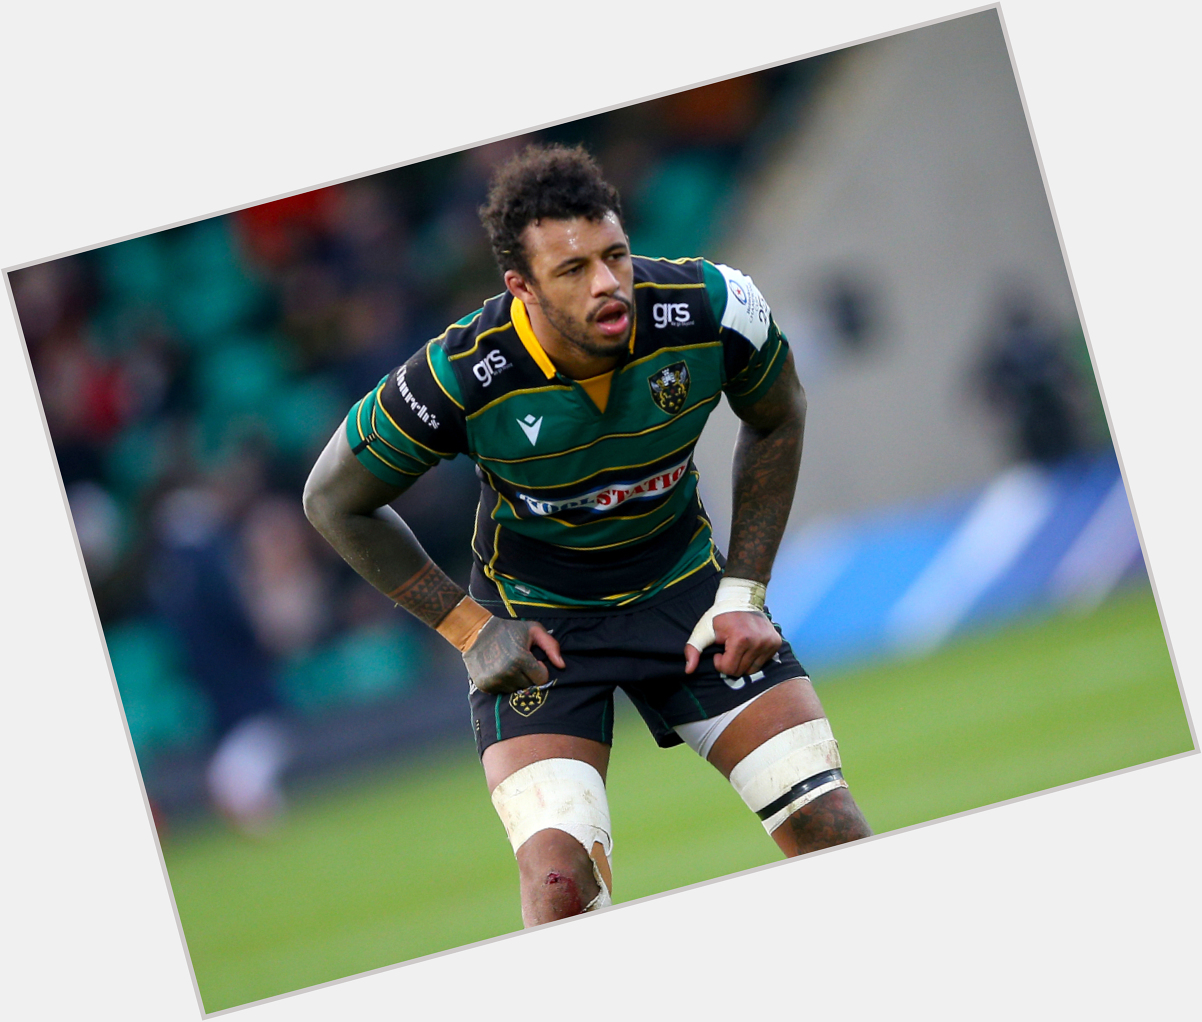 Courtney Lawes dating 2